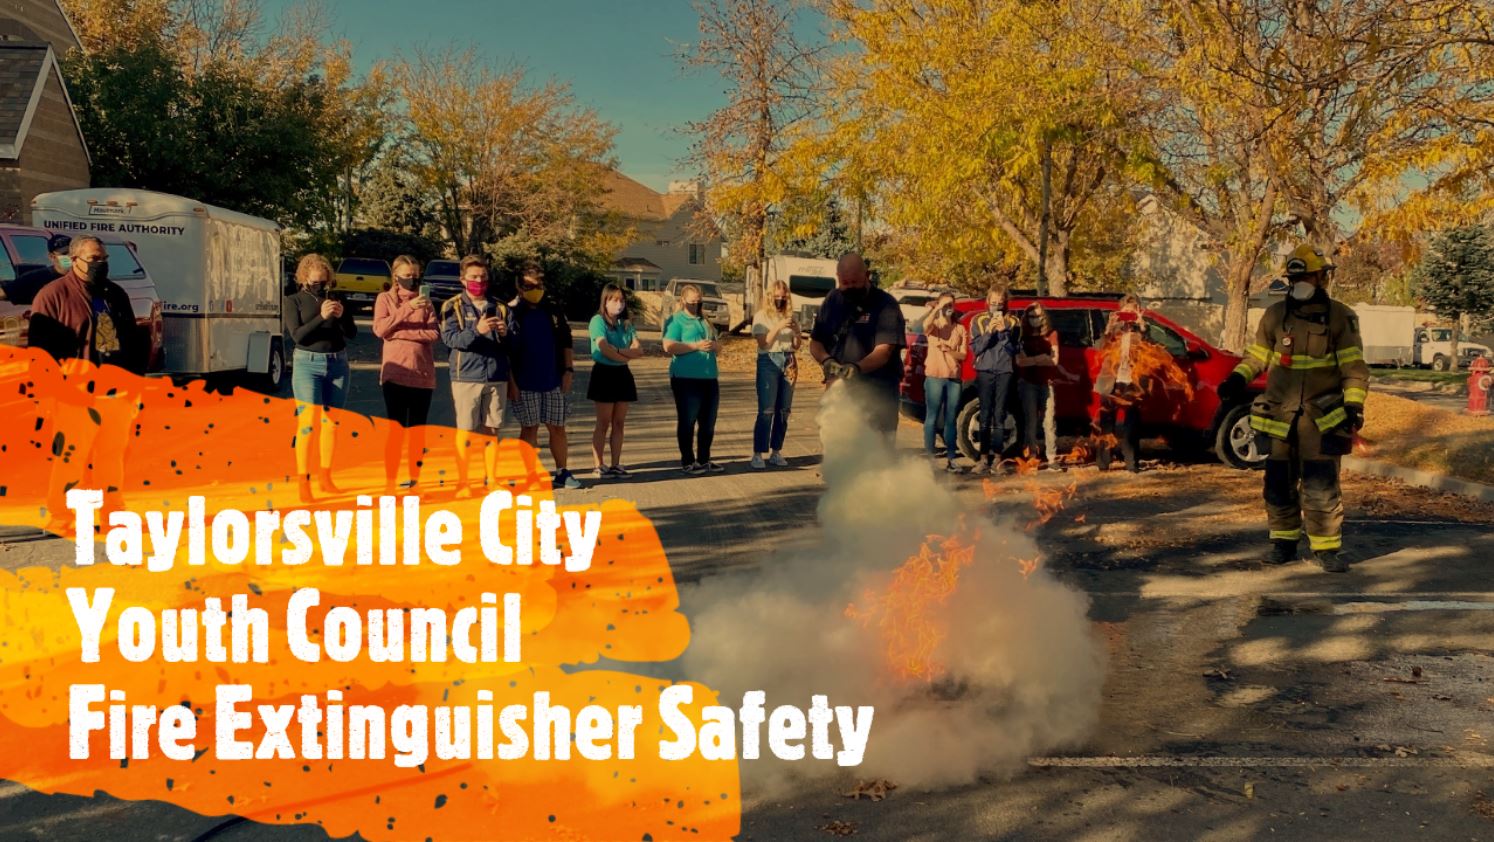 "Taylorsville City Youth Council Fire Extinguisher Safety" firefighter sprays fire with fire extinguisher